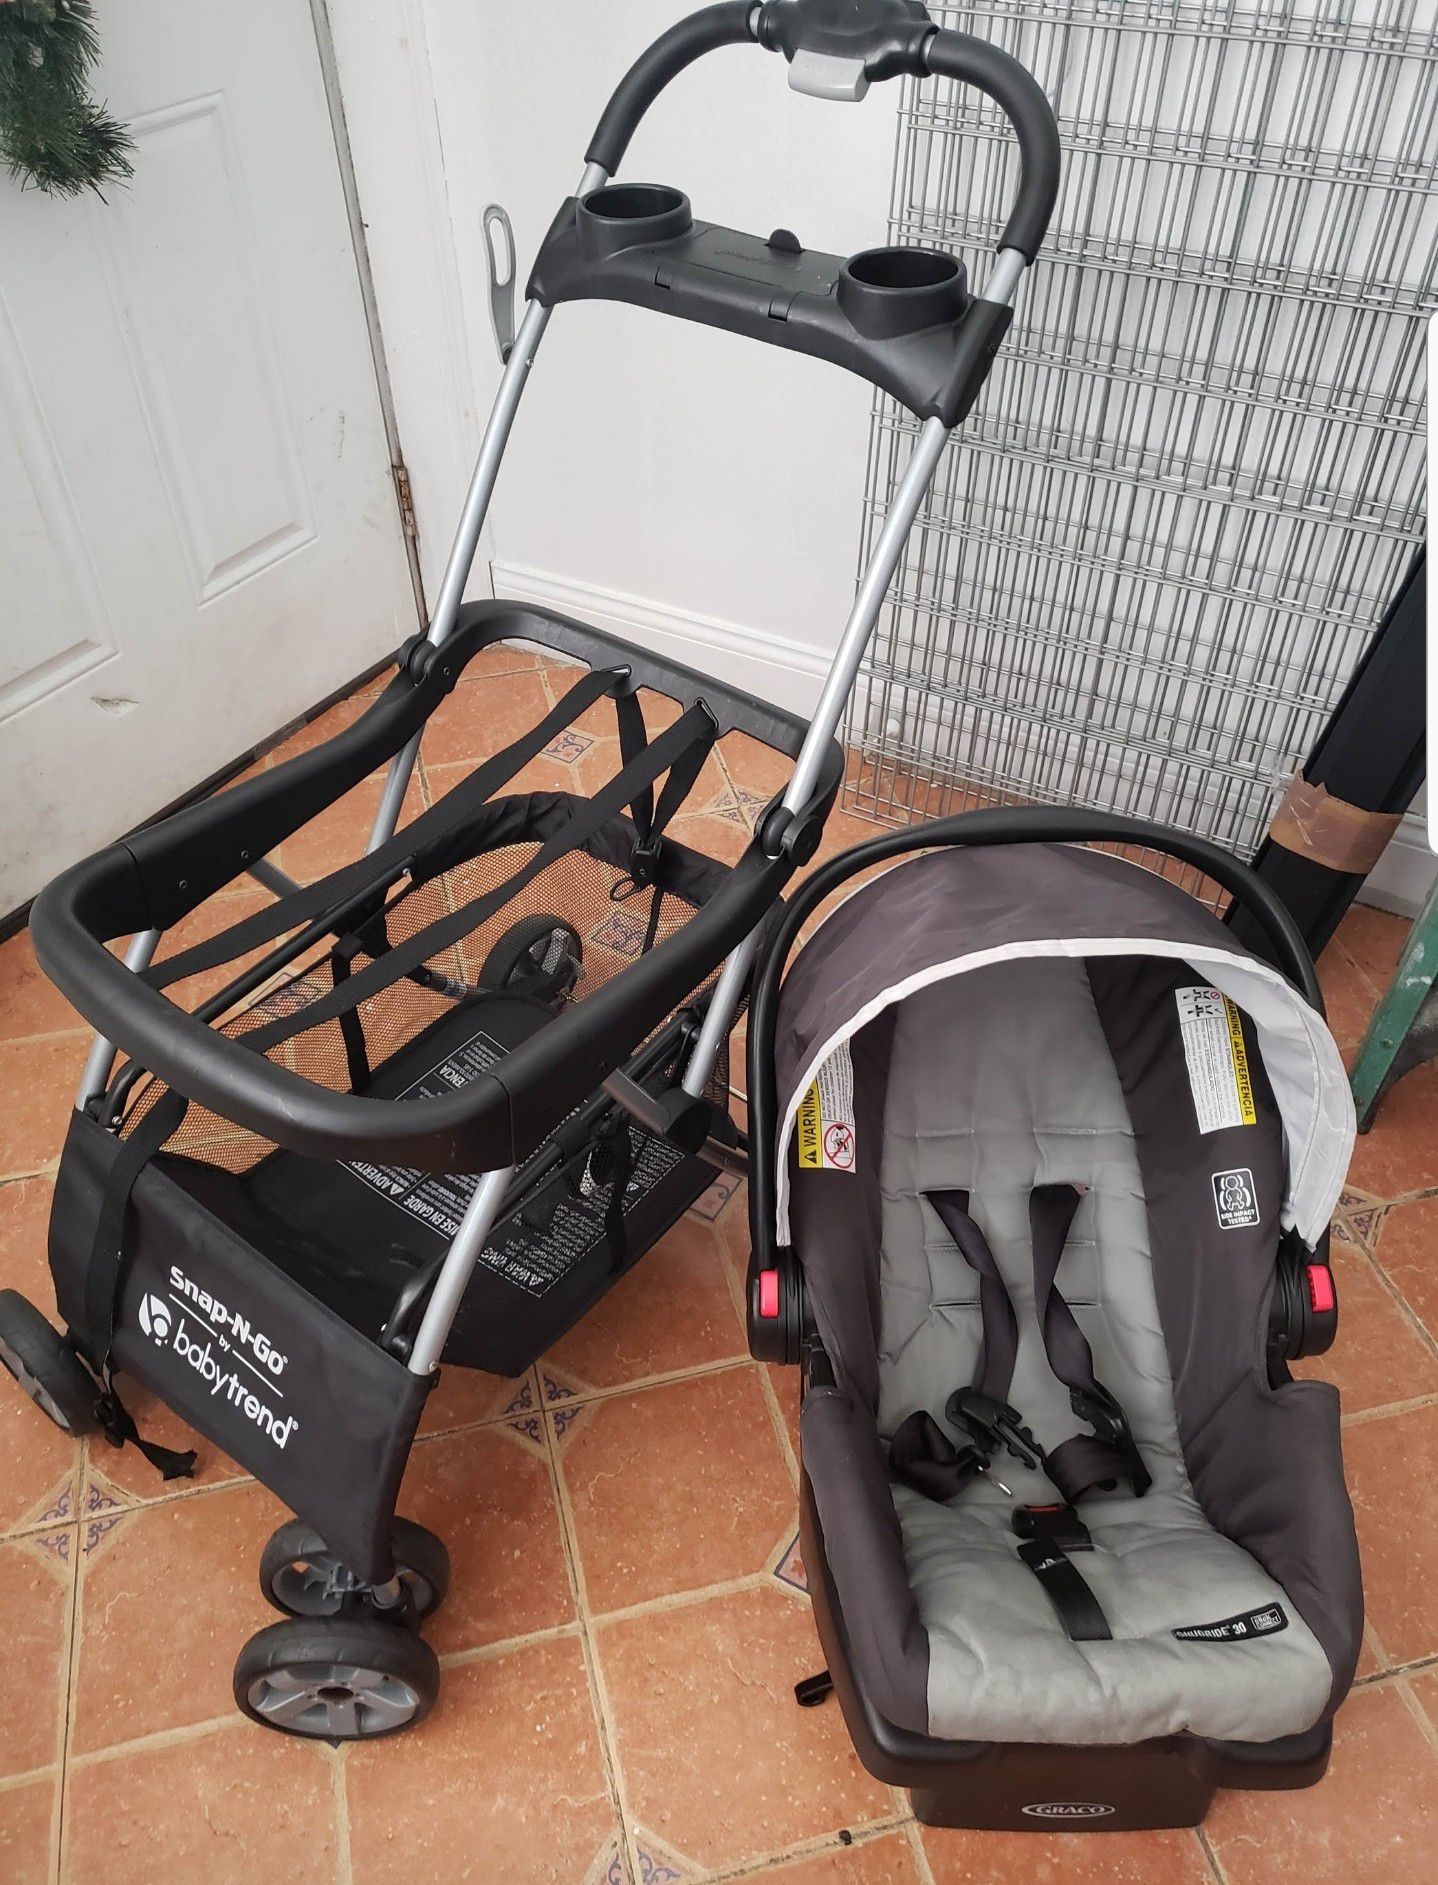 Graco Snap n Go baby seat and stroller